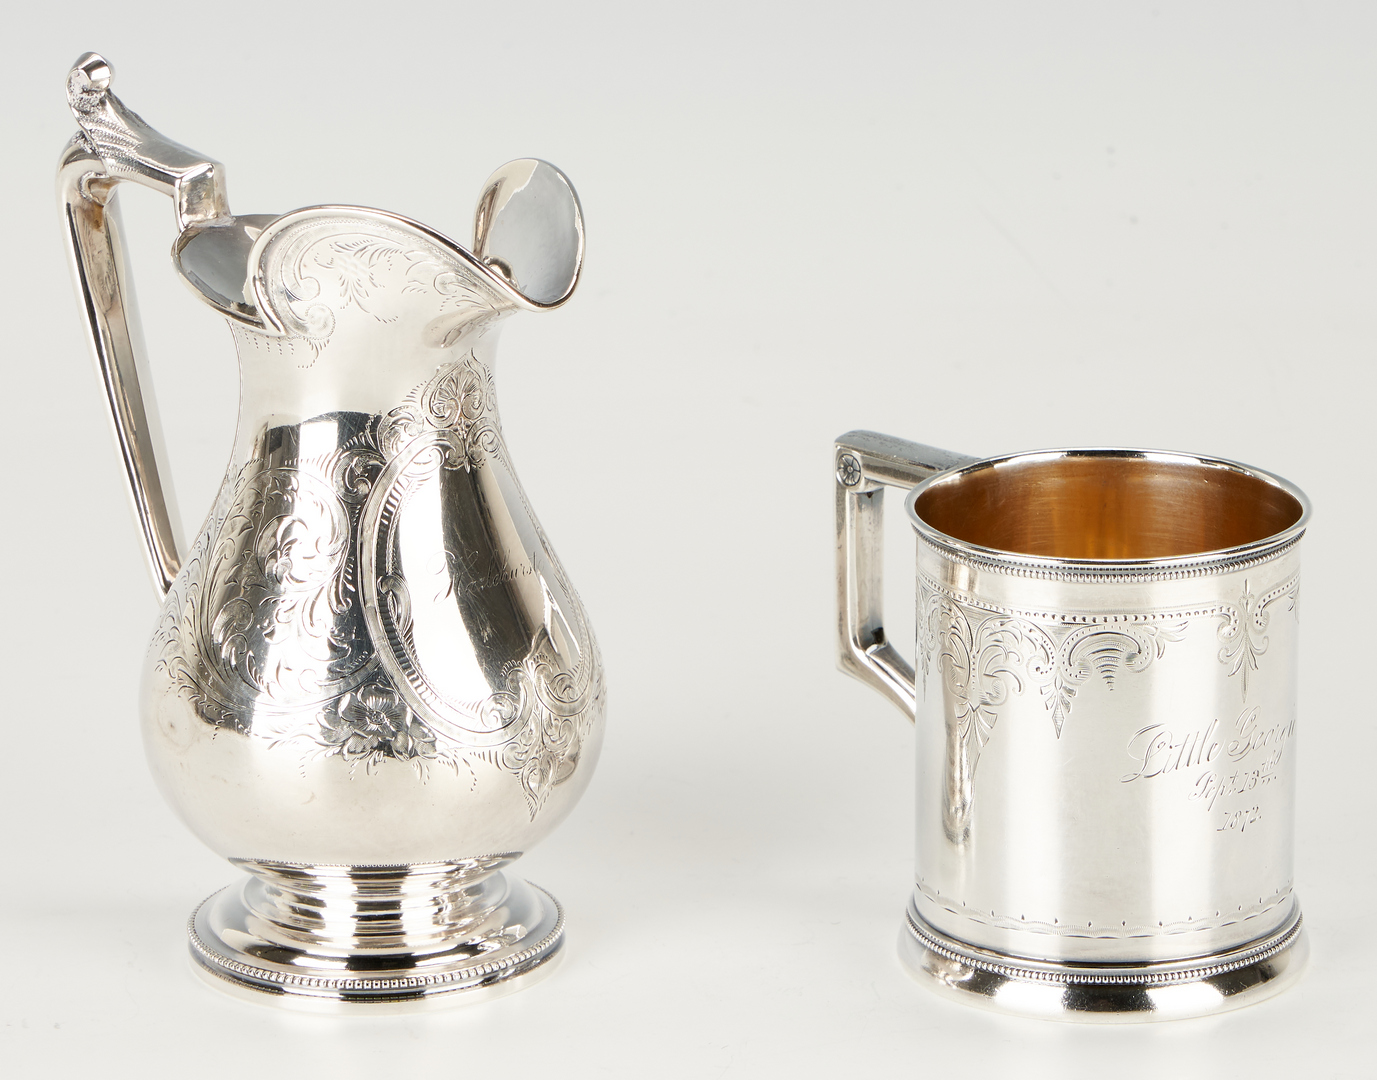 Lot 104: 16 Coin & Sterling Silver Items, incl. Medallion Ladle & Creamer